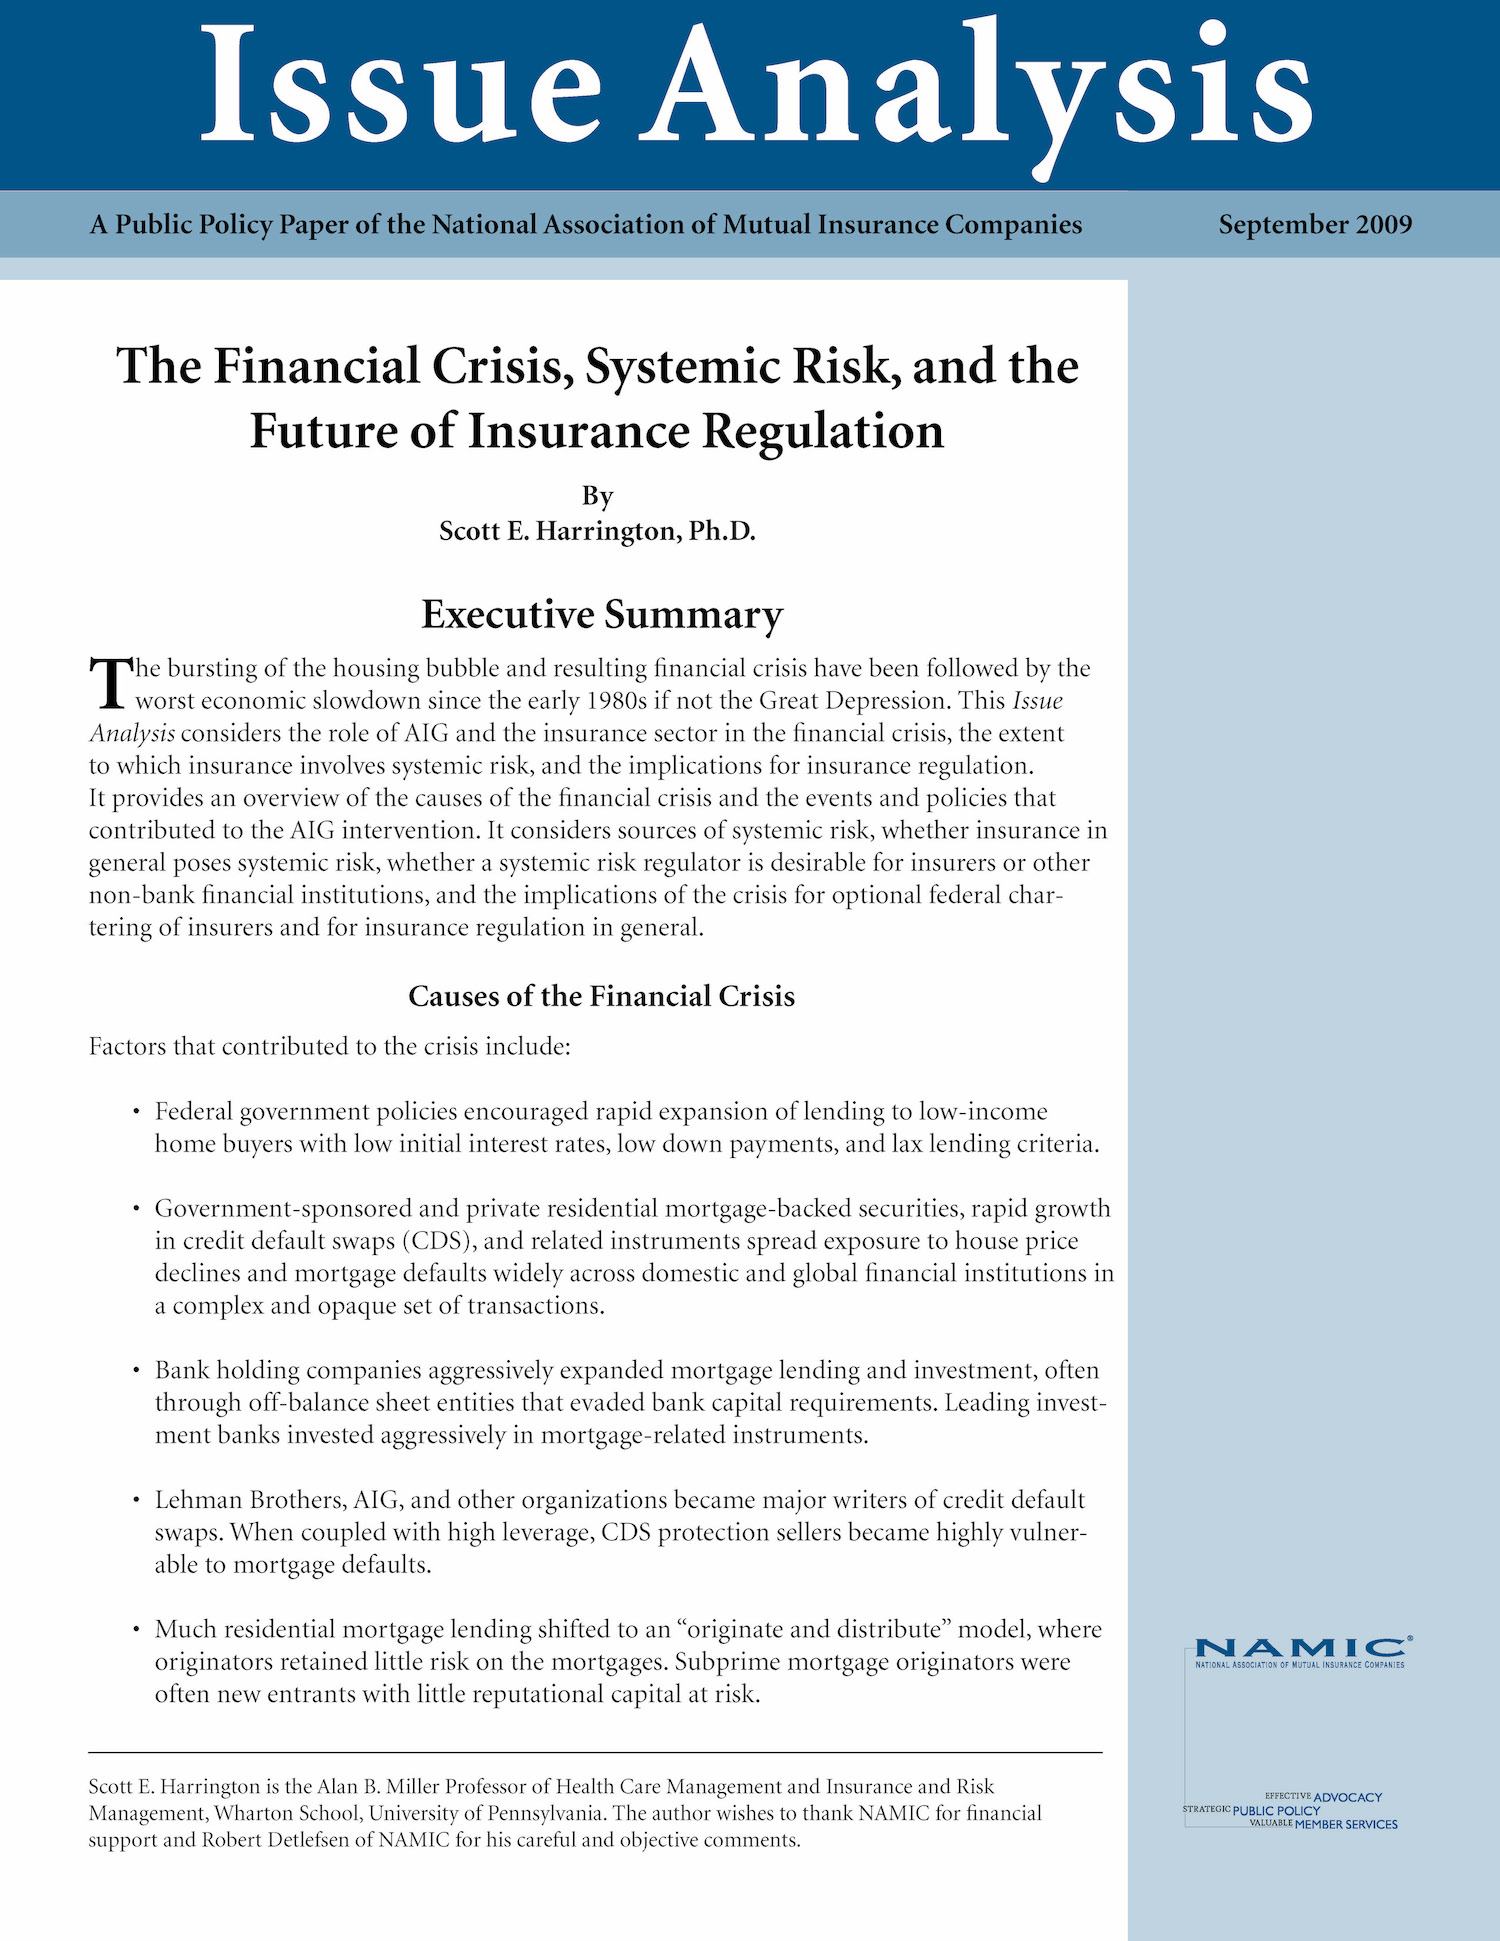 The Financial Crisis, Systemic Risk, and the Future of Insurance Regulation PDF